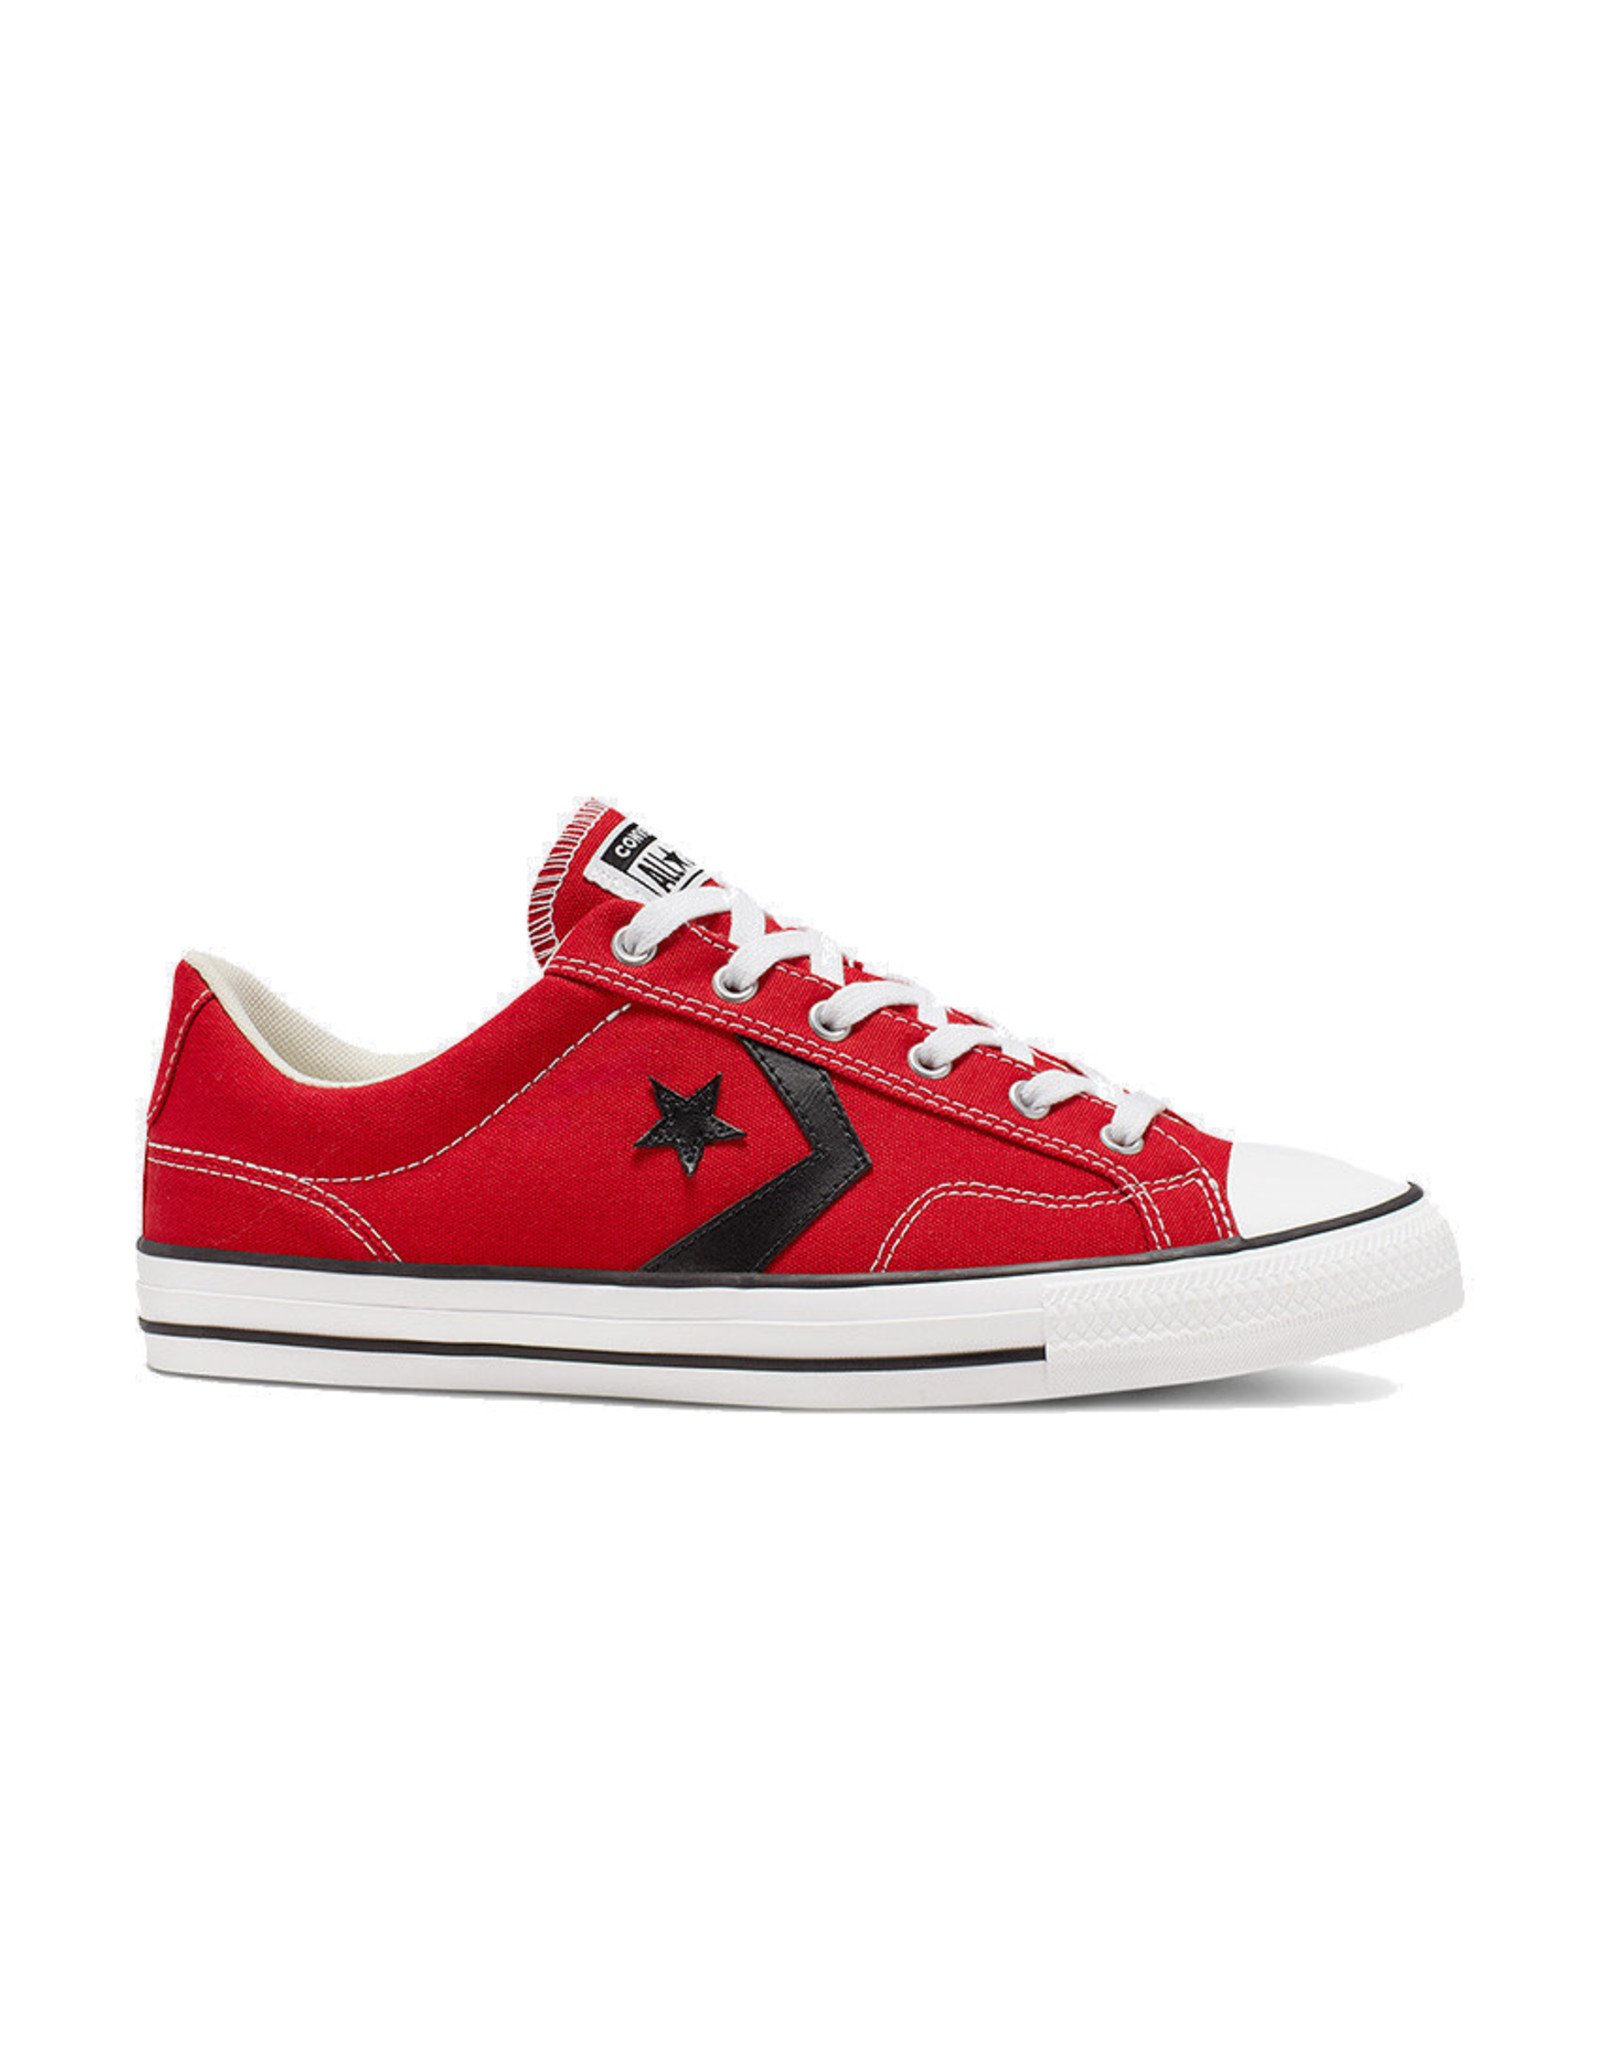 converse star player red